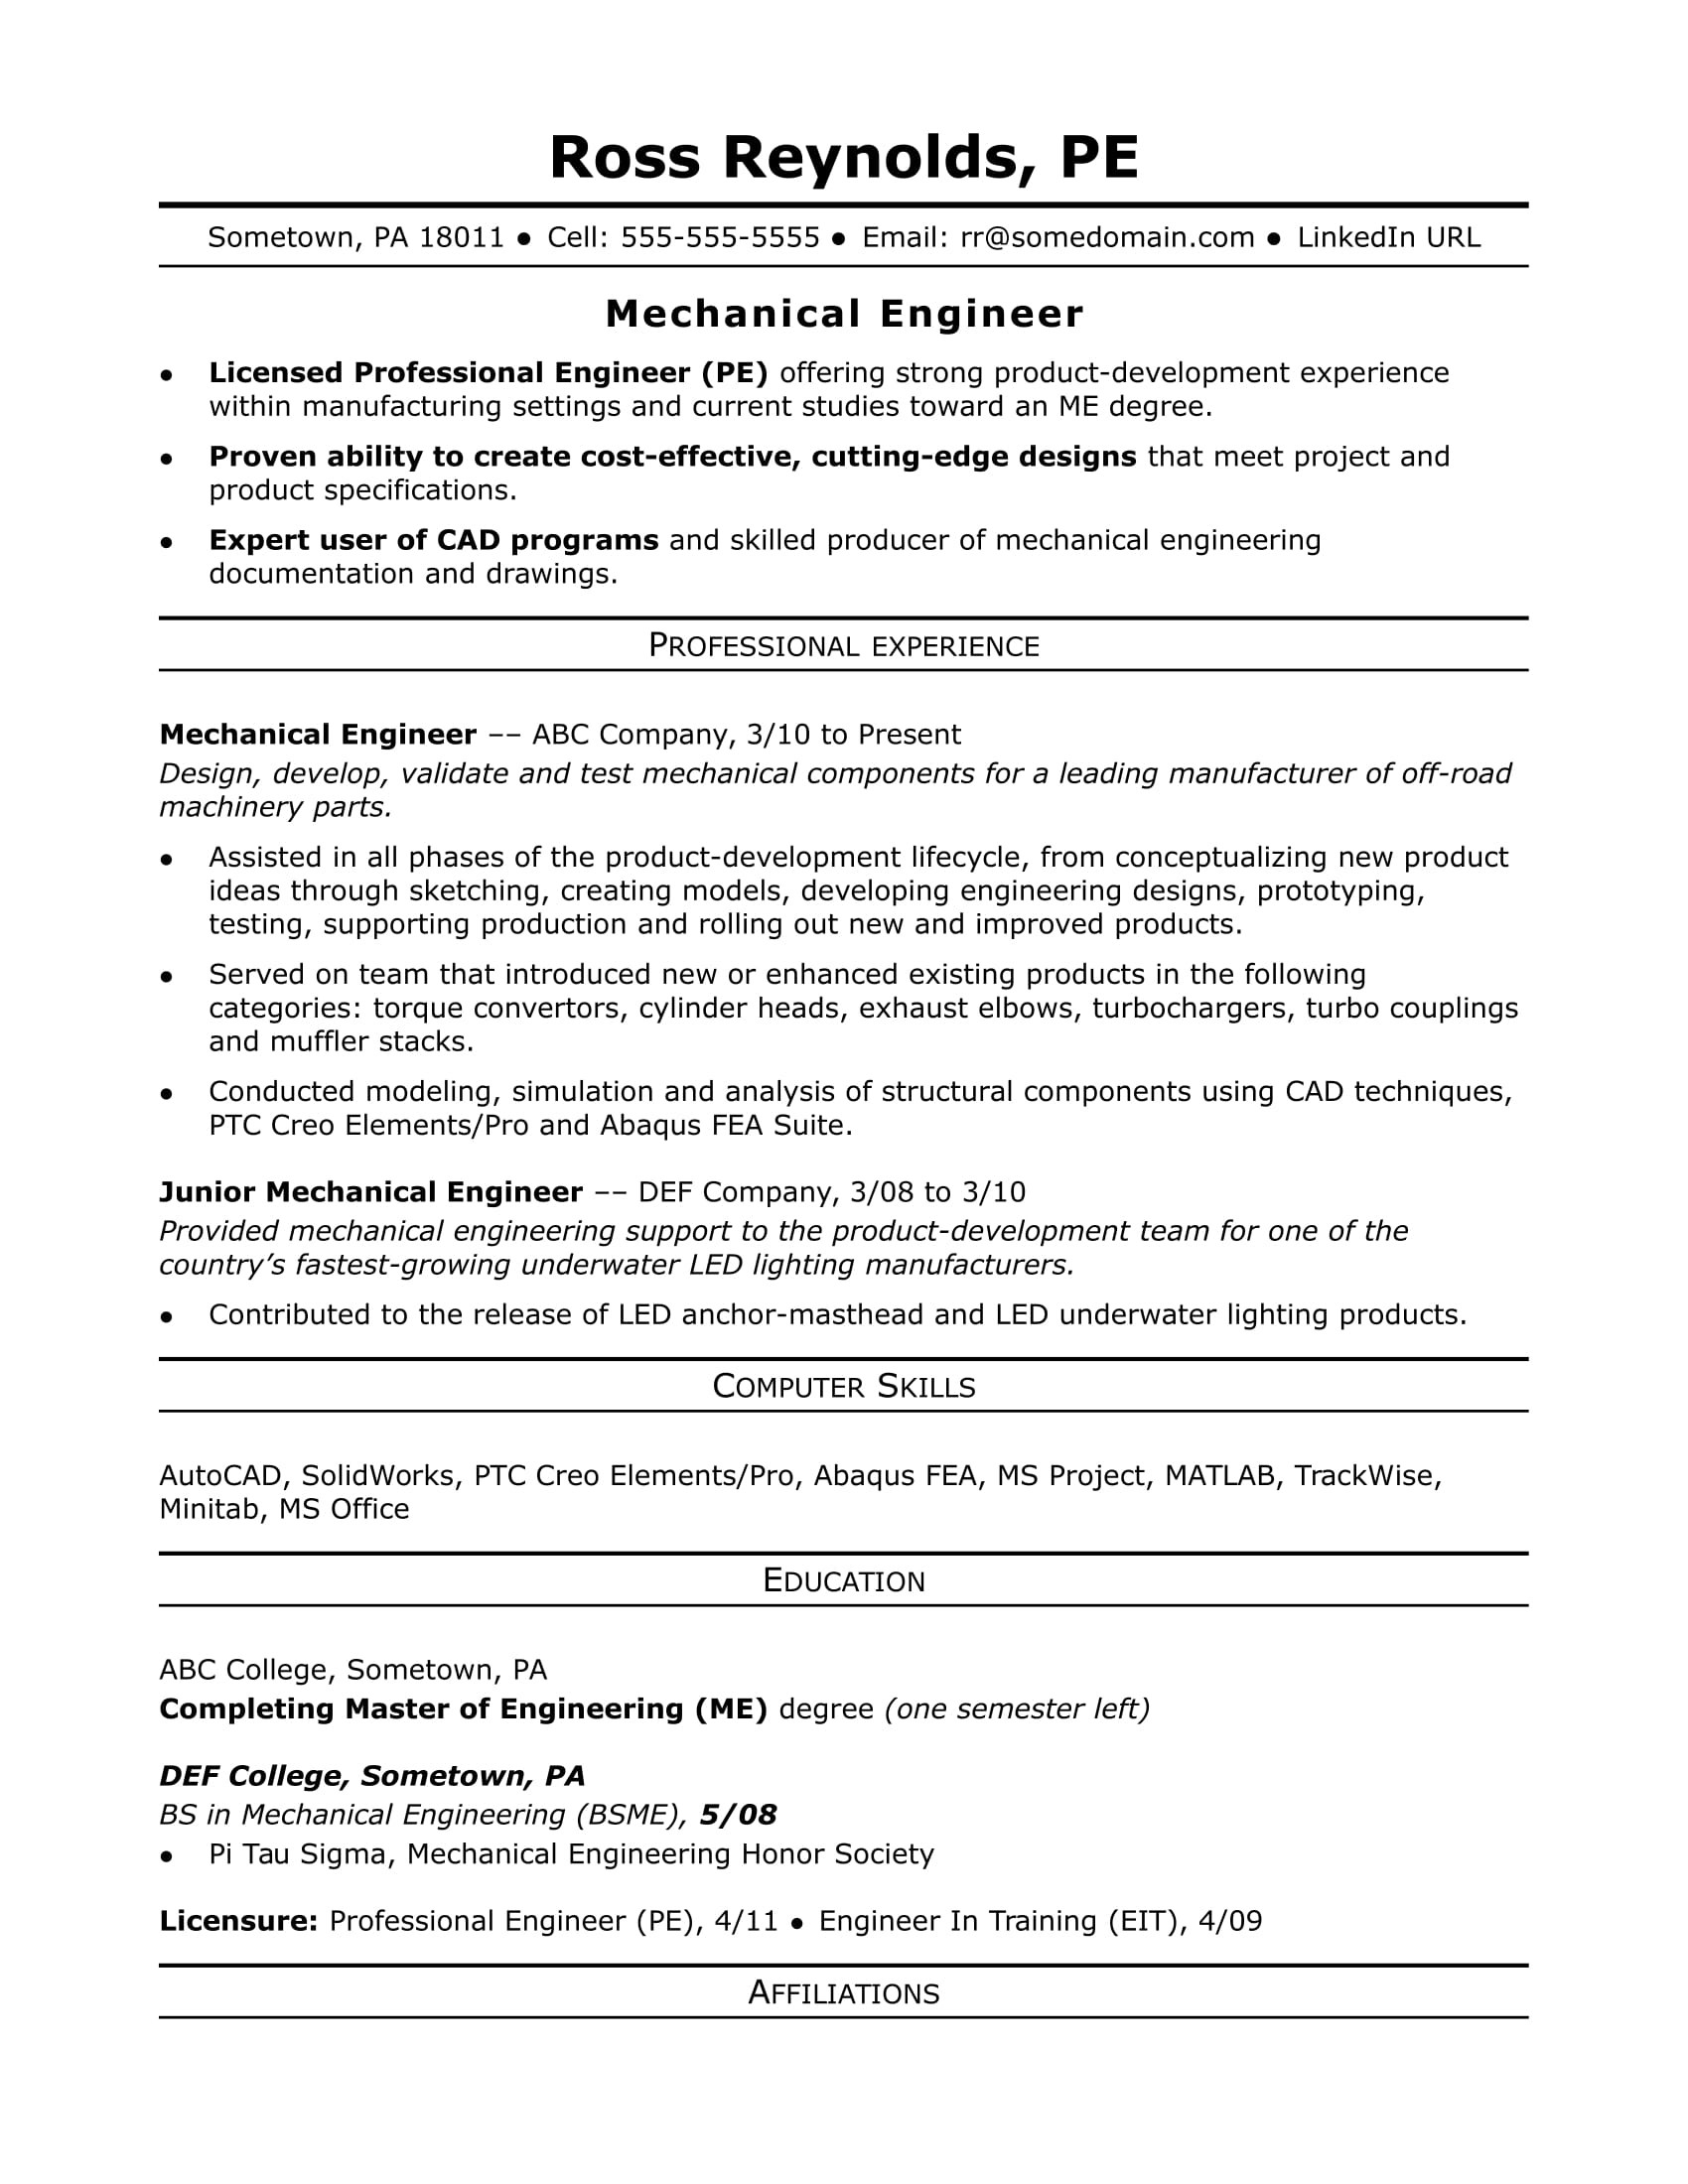 Sample Resume format for Engineering Students Sample Resume for A Midlevel Mechanical Engineer Monster.com